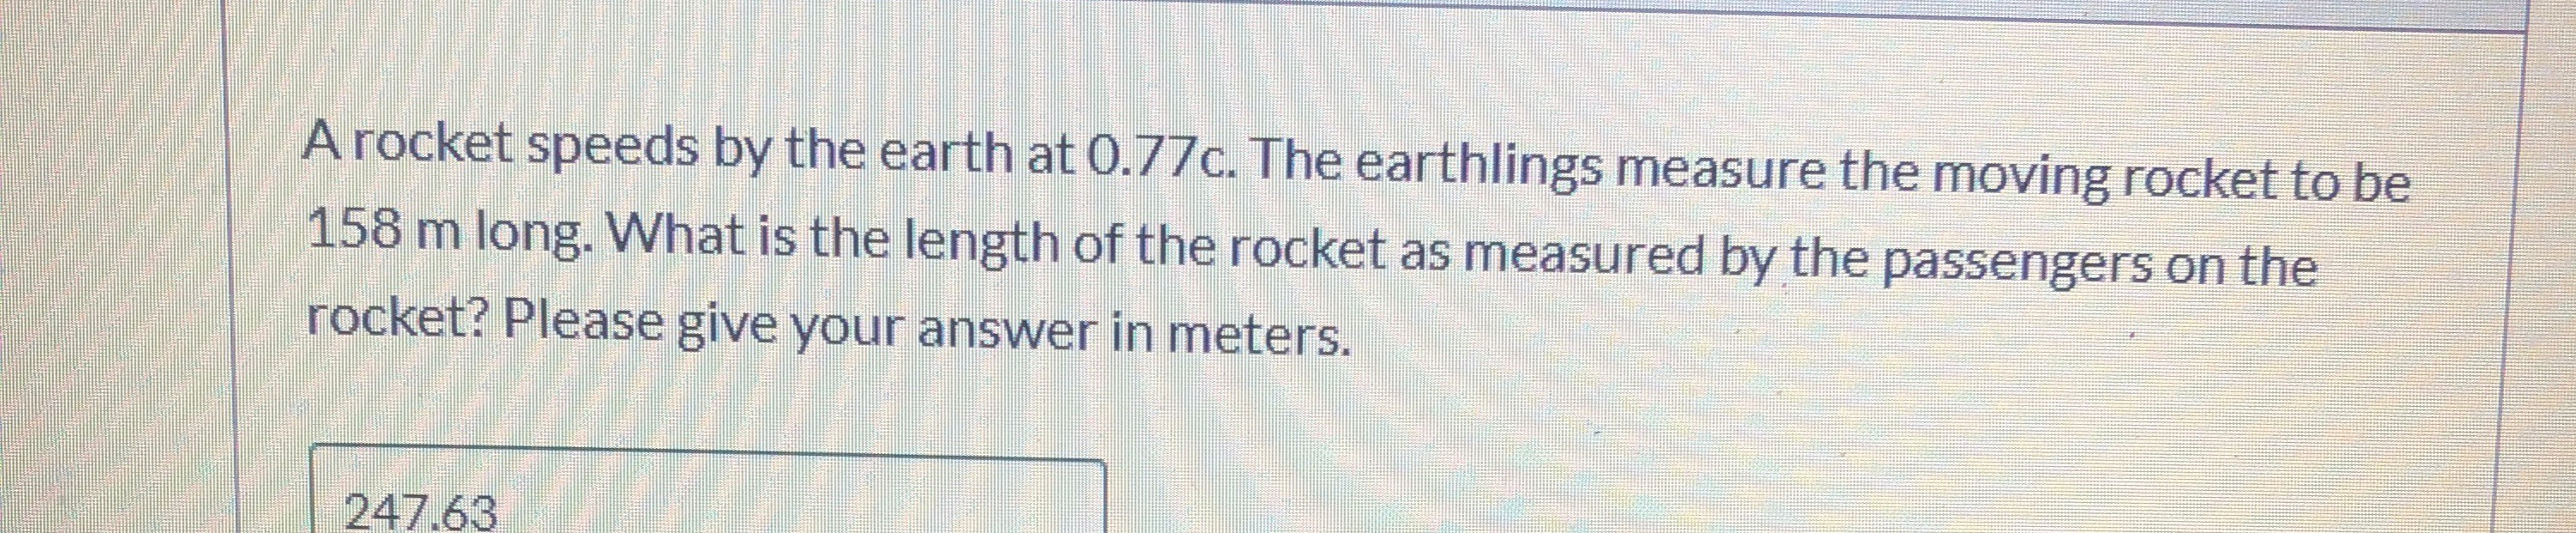 A rocket speeds by the earth at 0.77c. The earthlings measure the moving rocket to be
158 m long. What is the length of the rocket as measured by the passengers on the
rocket? Please give your answer in meters.
247.63
